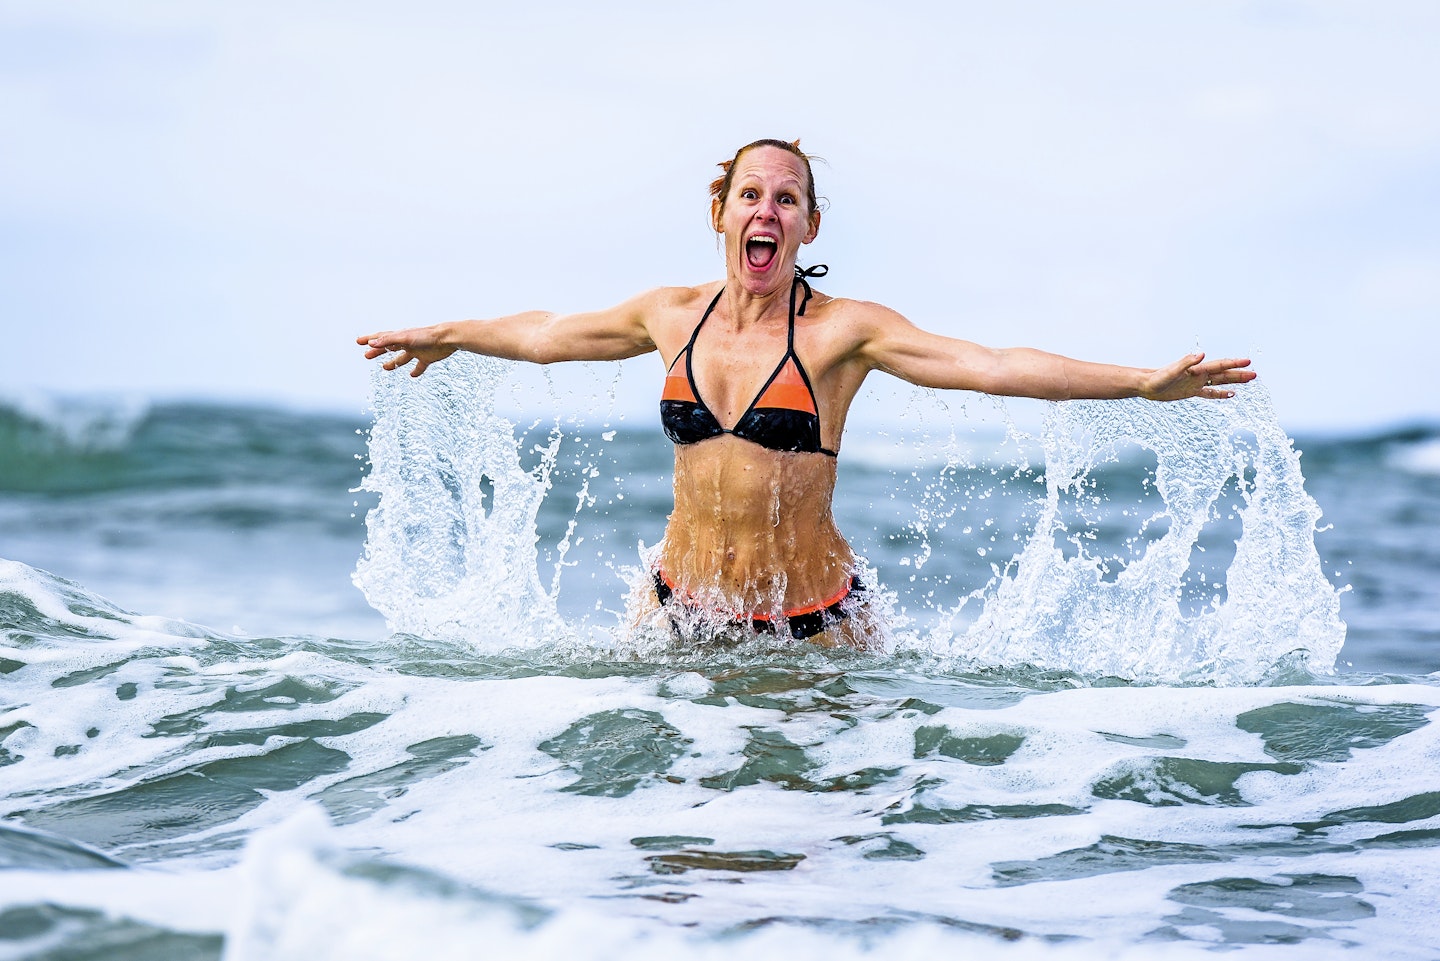 How wild swimming could improve your wellbeing